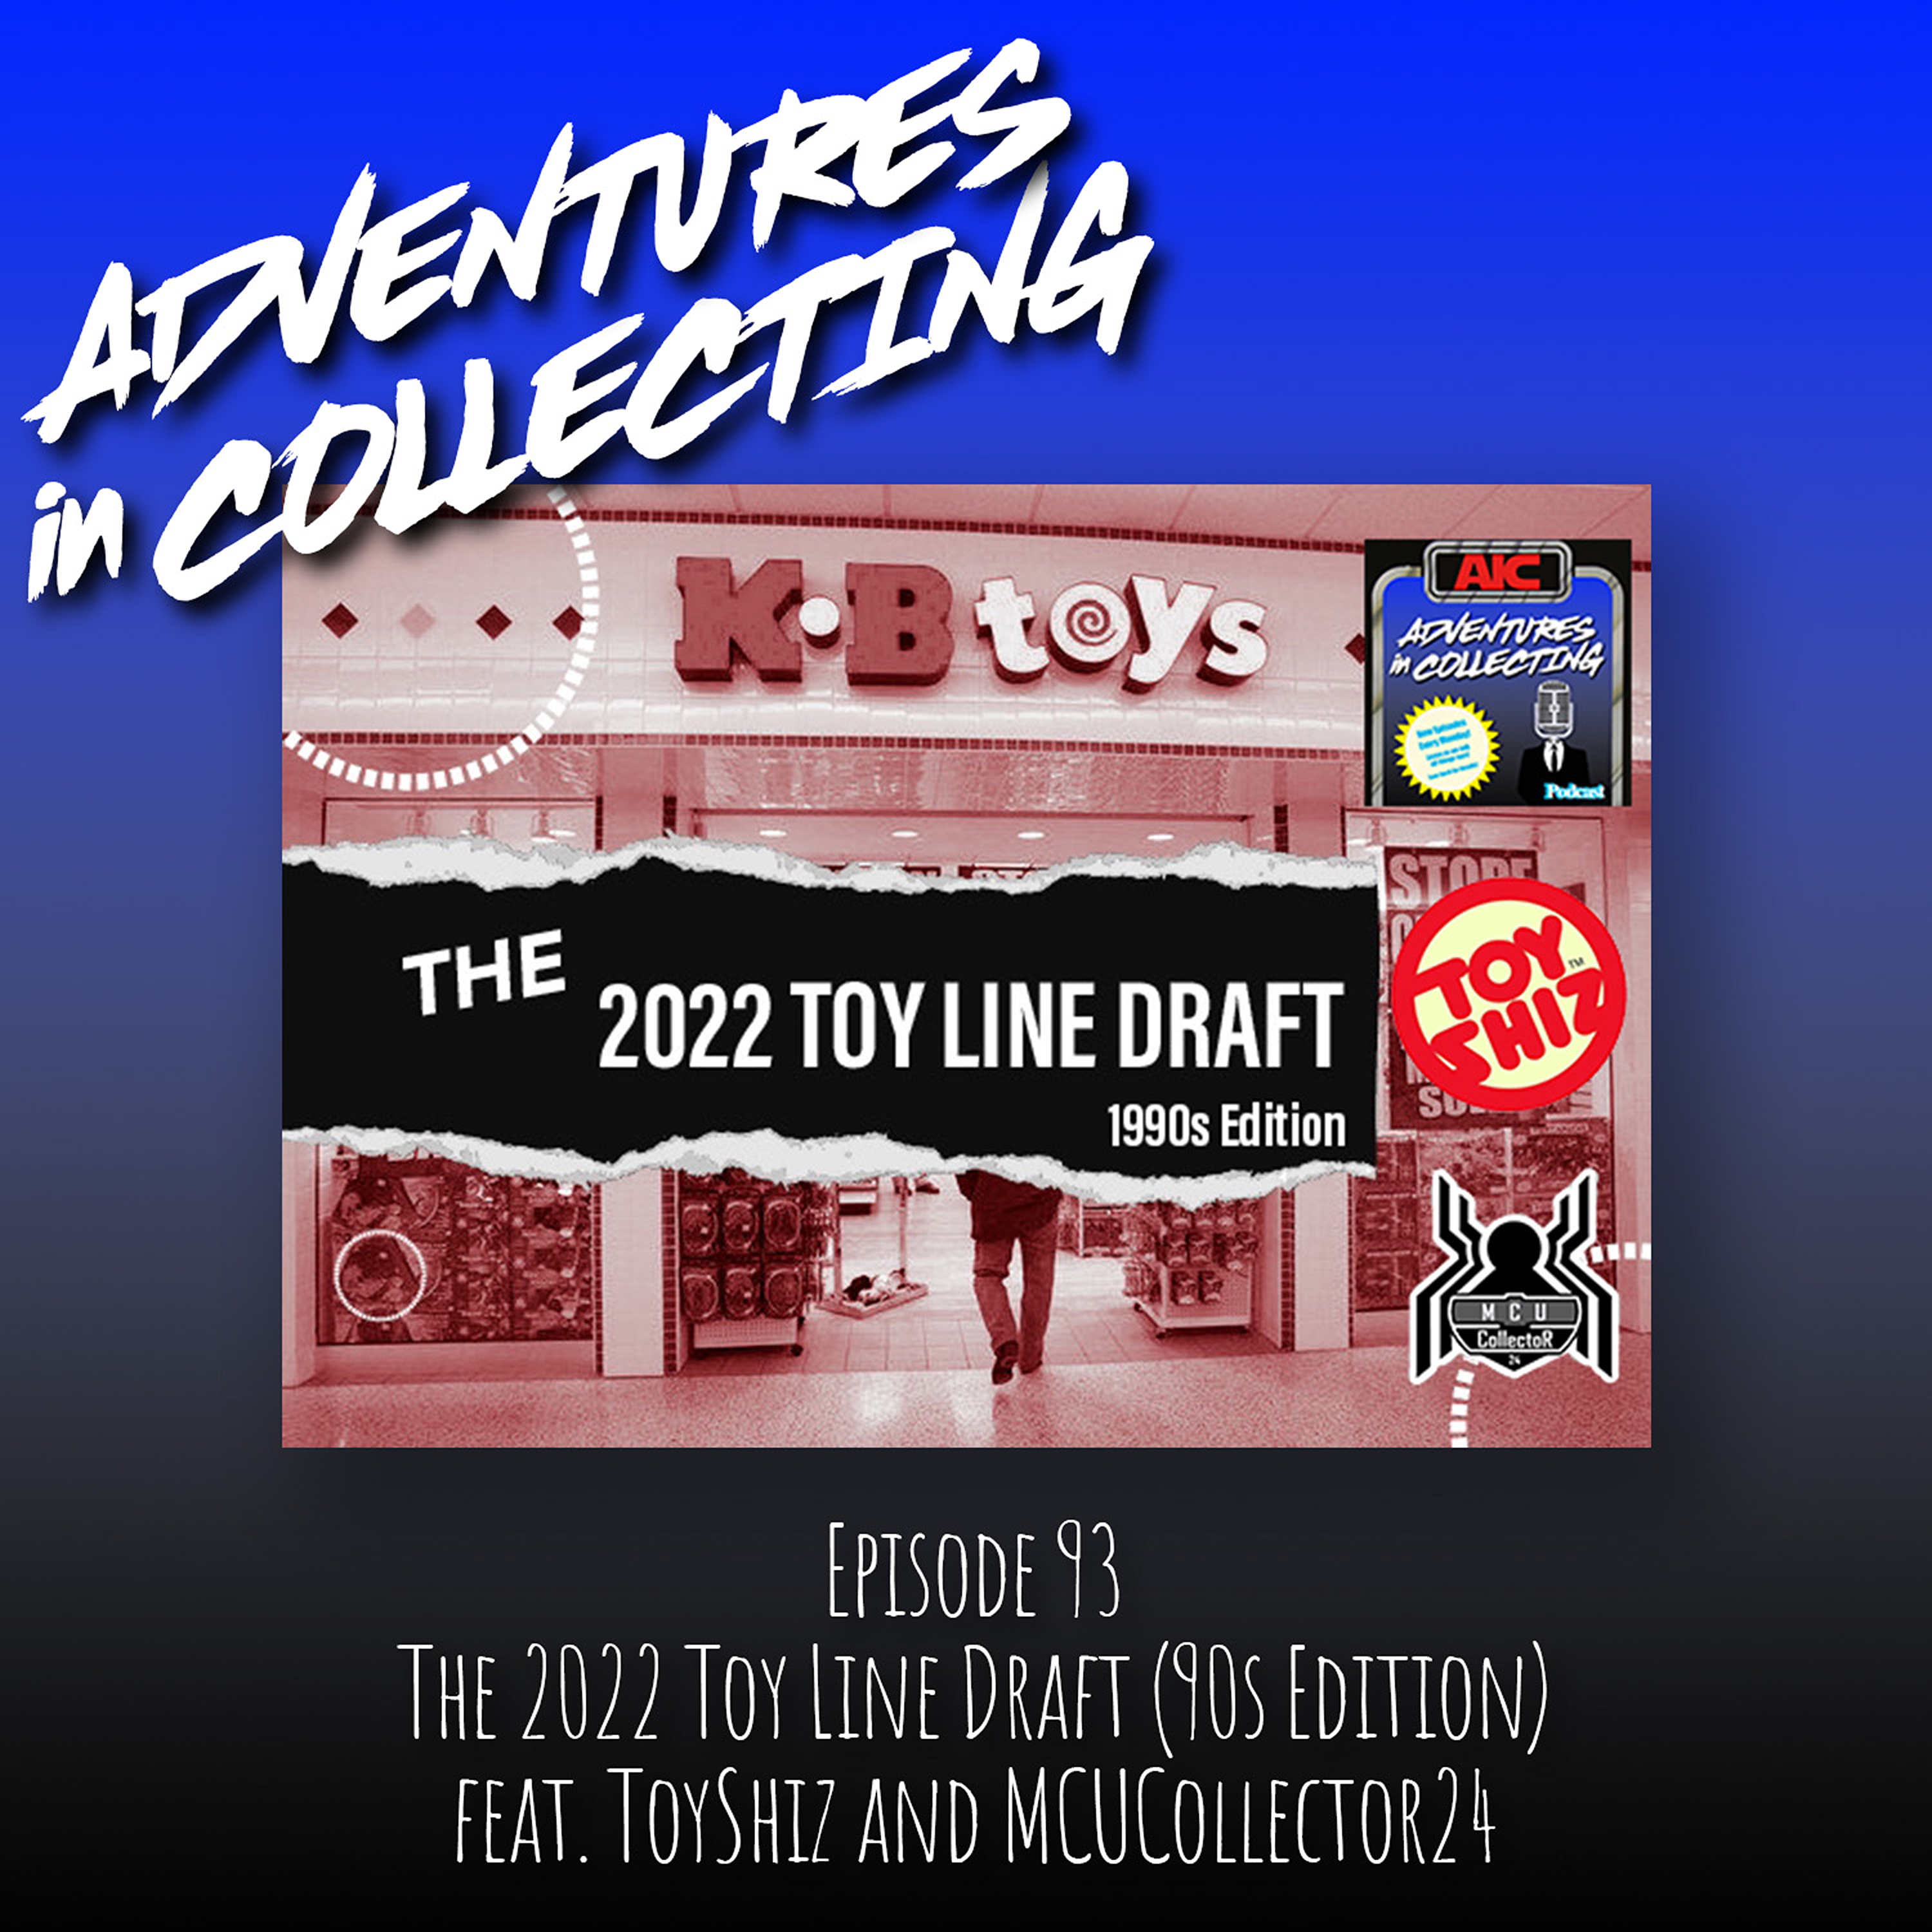 The 2022 Toy Line Draft (1990’s Edition) Feat. ToyShiz and MCUCollector24